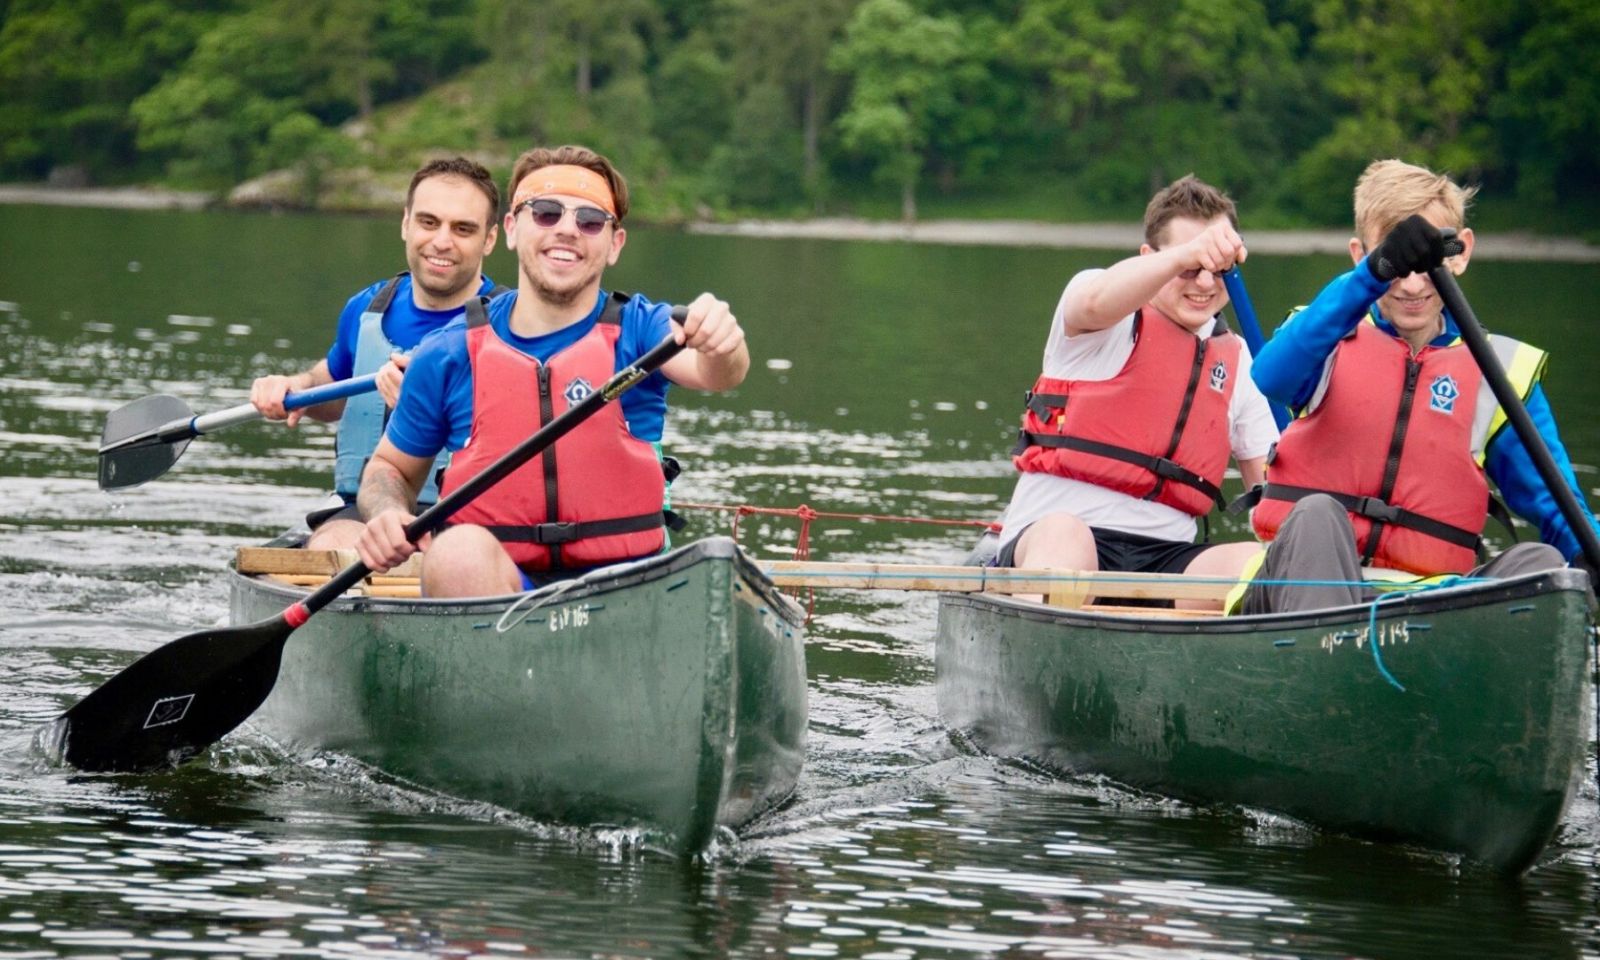 4 people in canoes smiling and having fun on the lake.